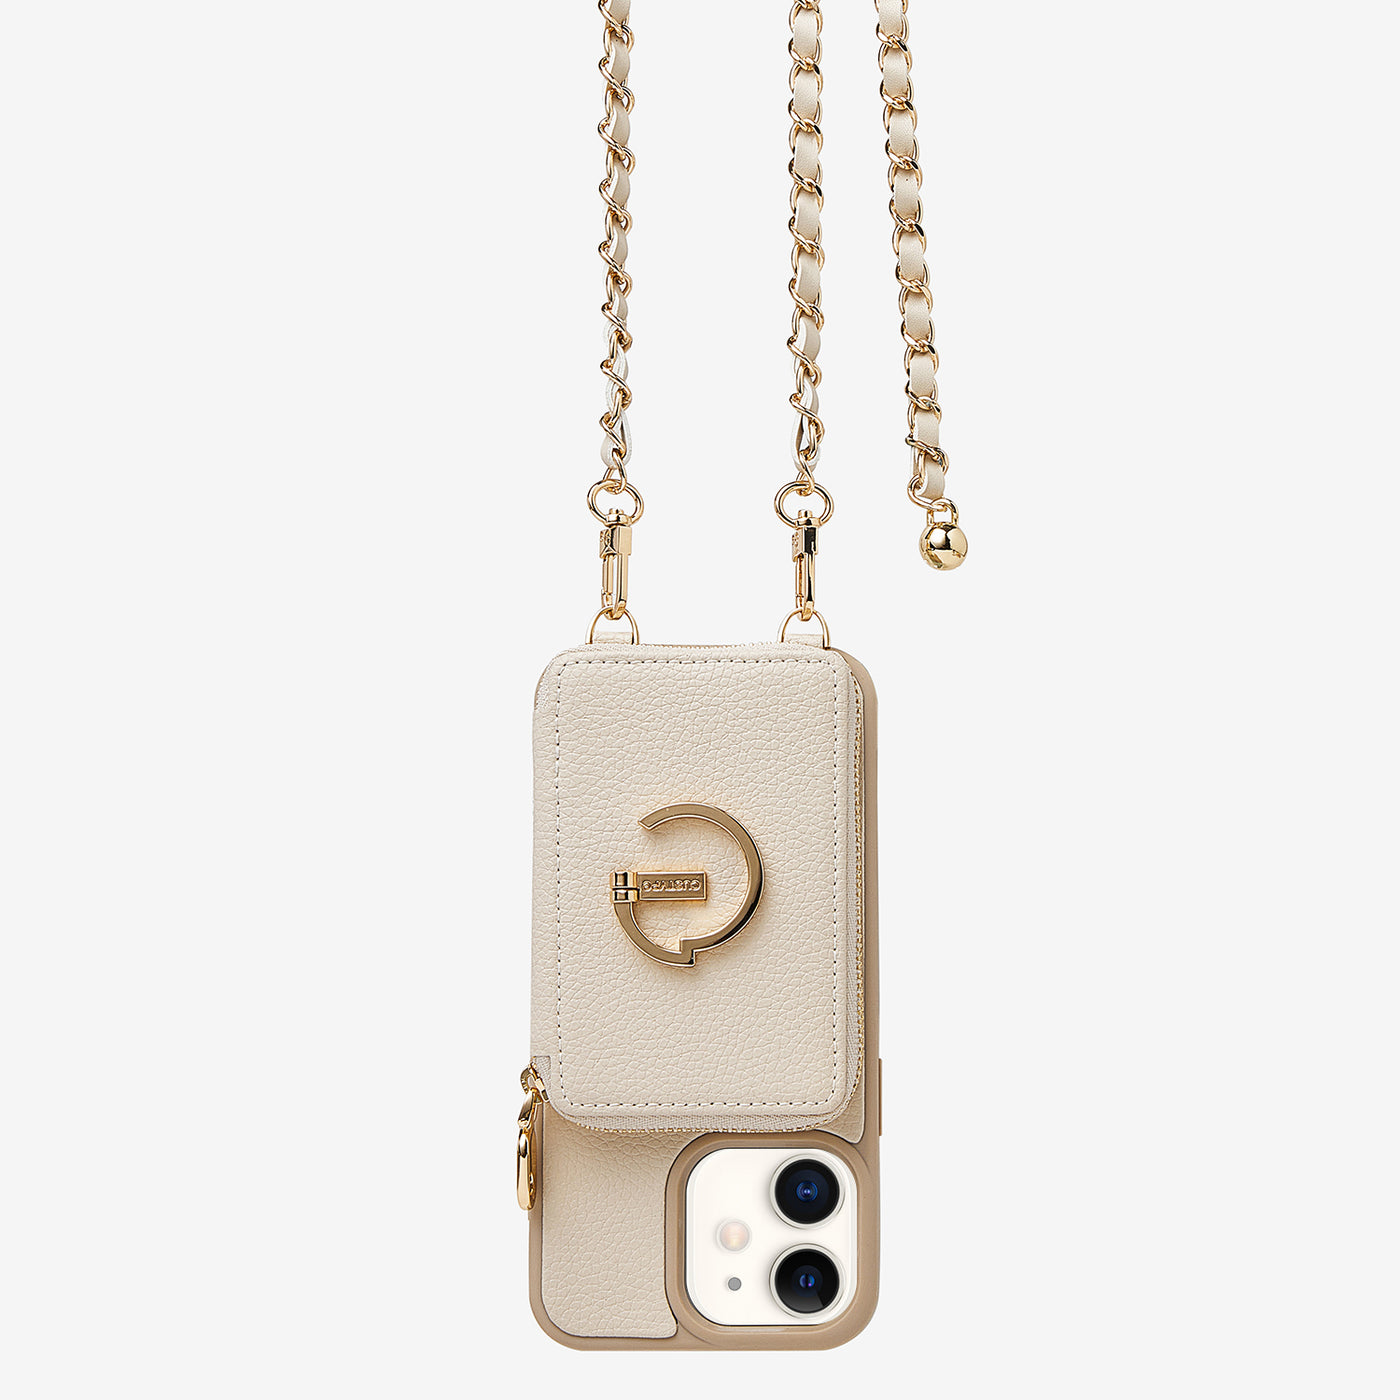 LuxeCharm- Lychee Phone Case with Chain Strap -Beige